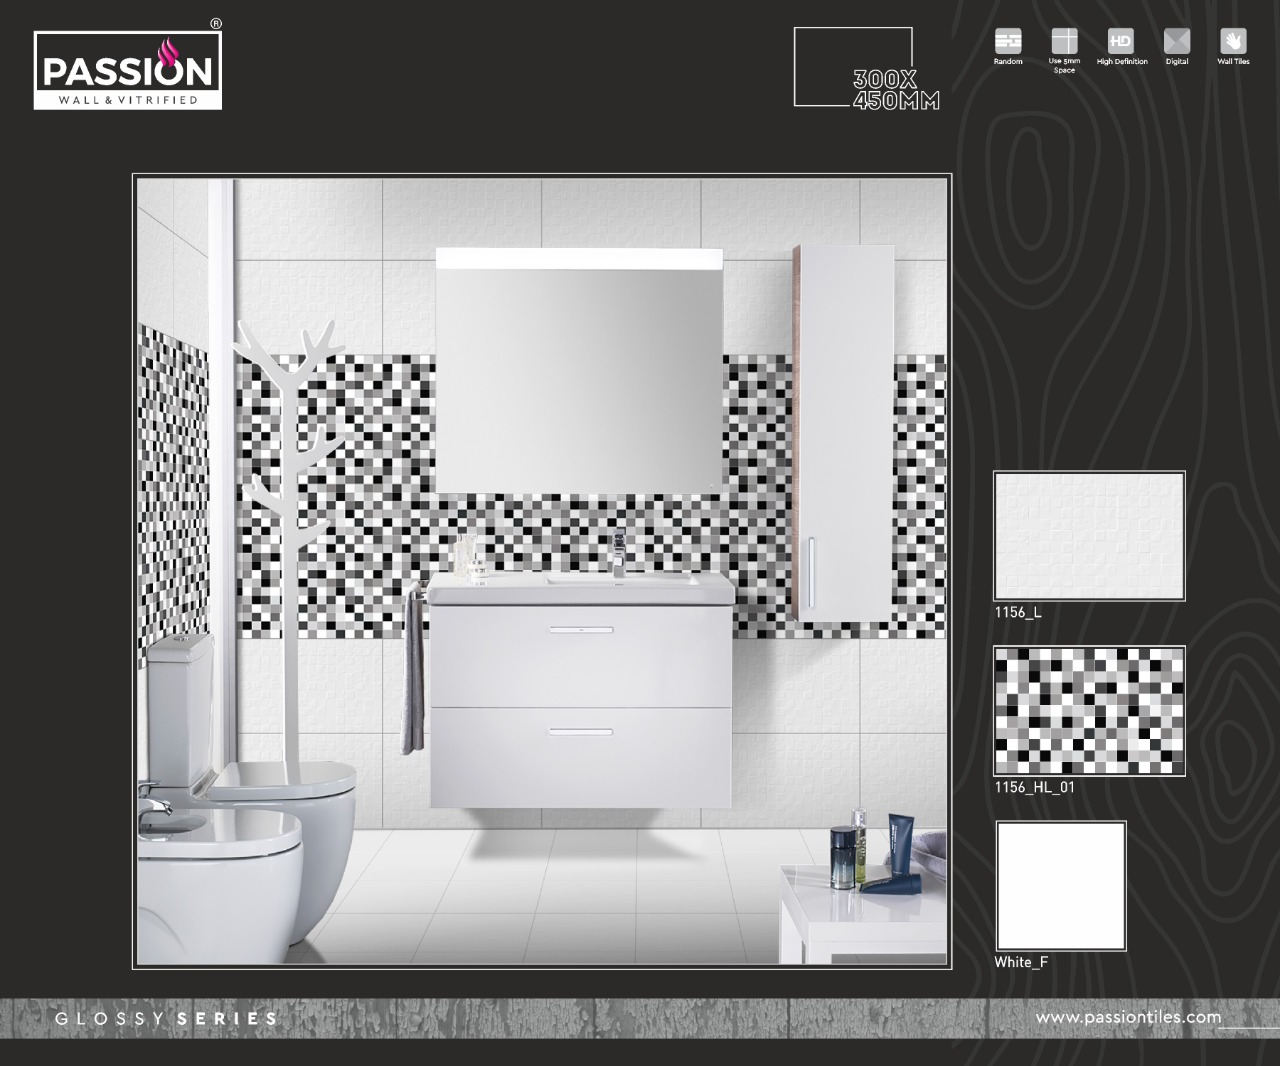 Wall Tiles - Glossy Series from Passion Vitrified